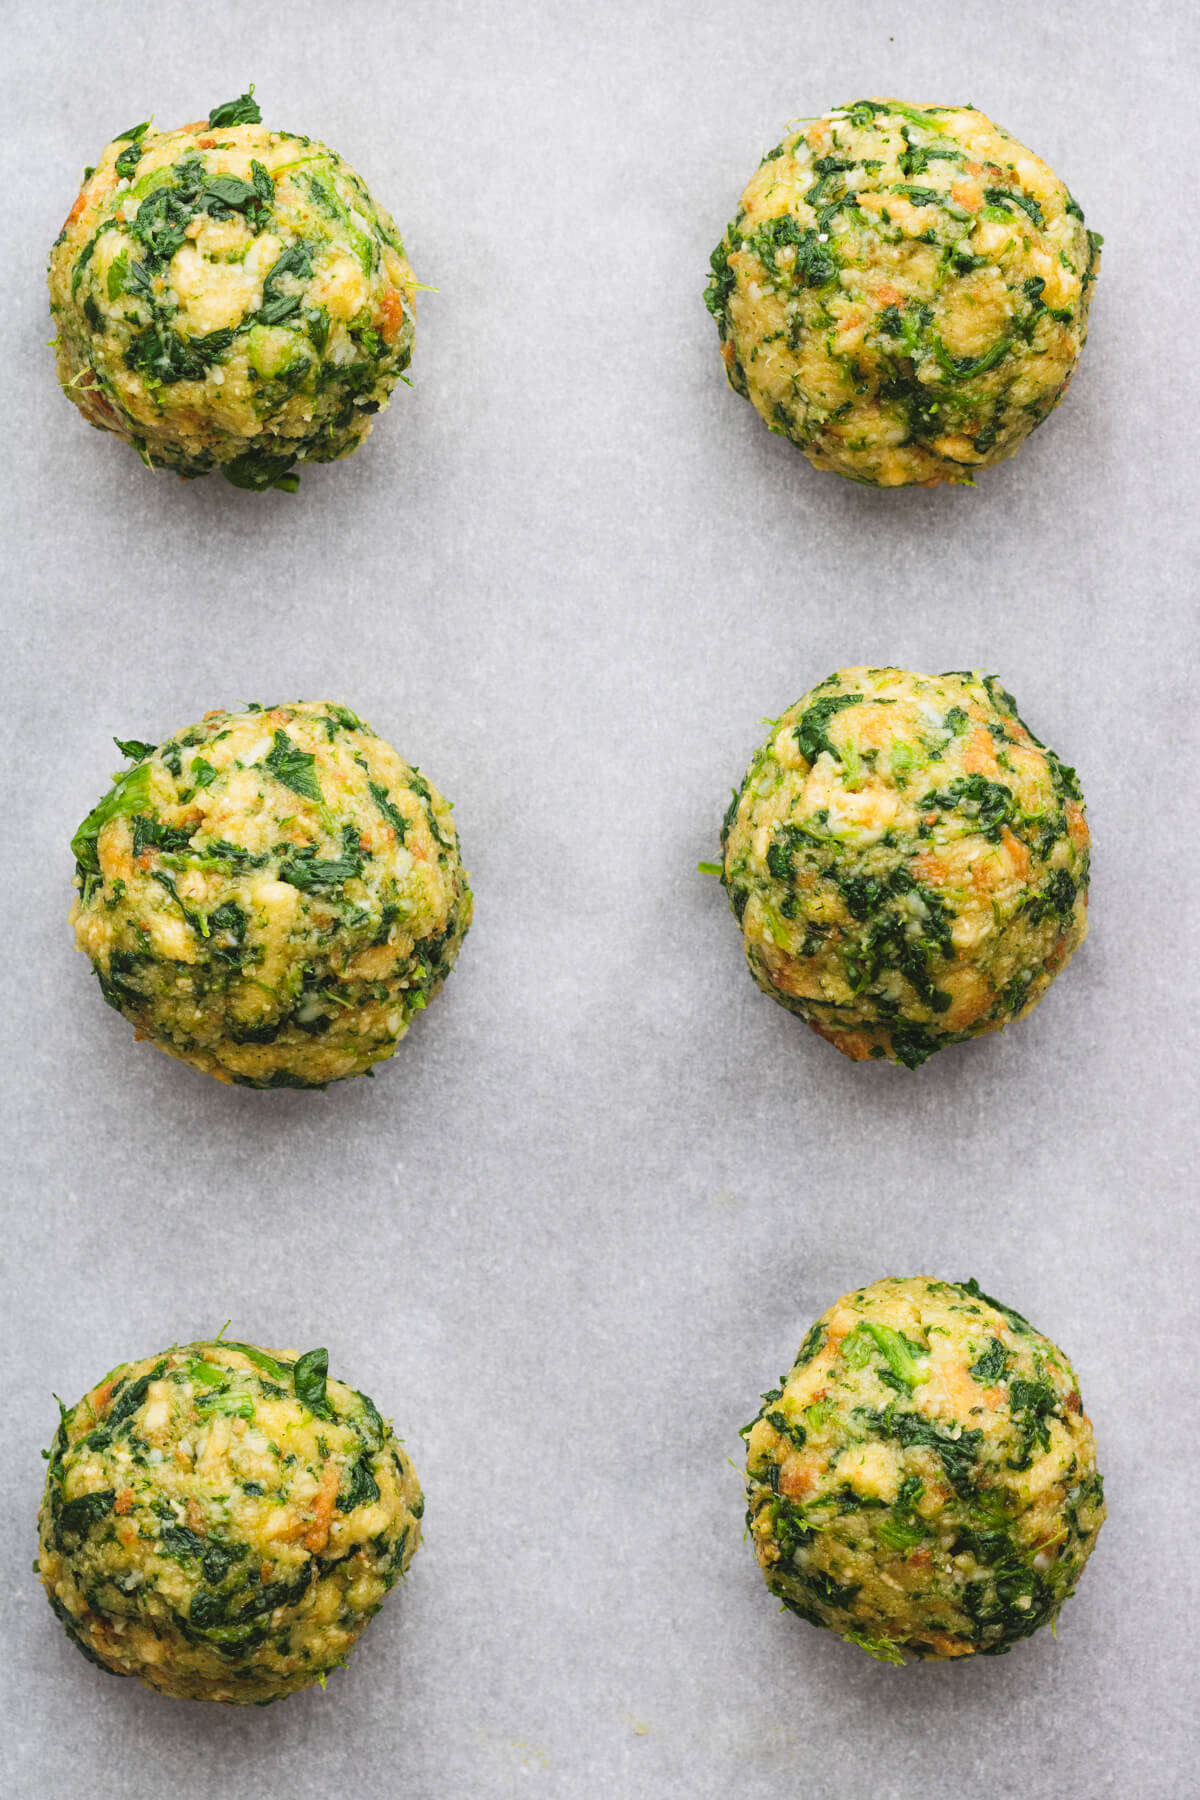 Spinach stuffing balls lined up on a piece of parchment paper.